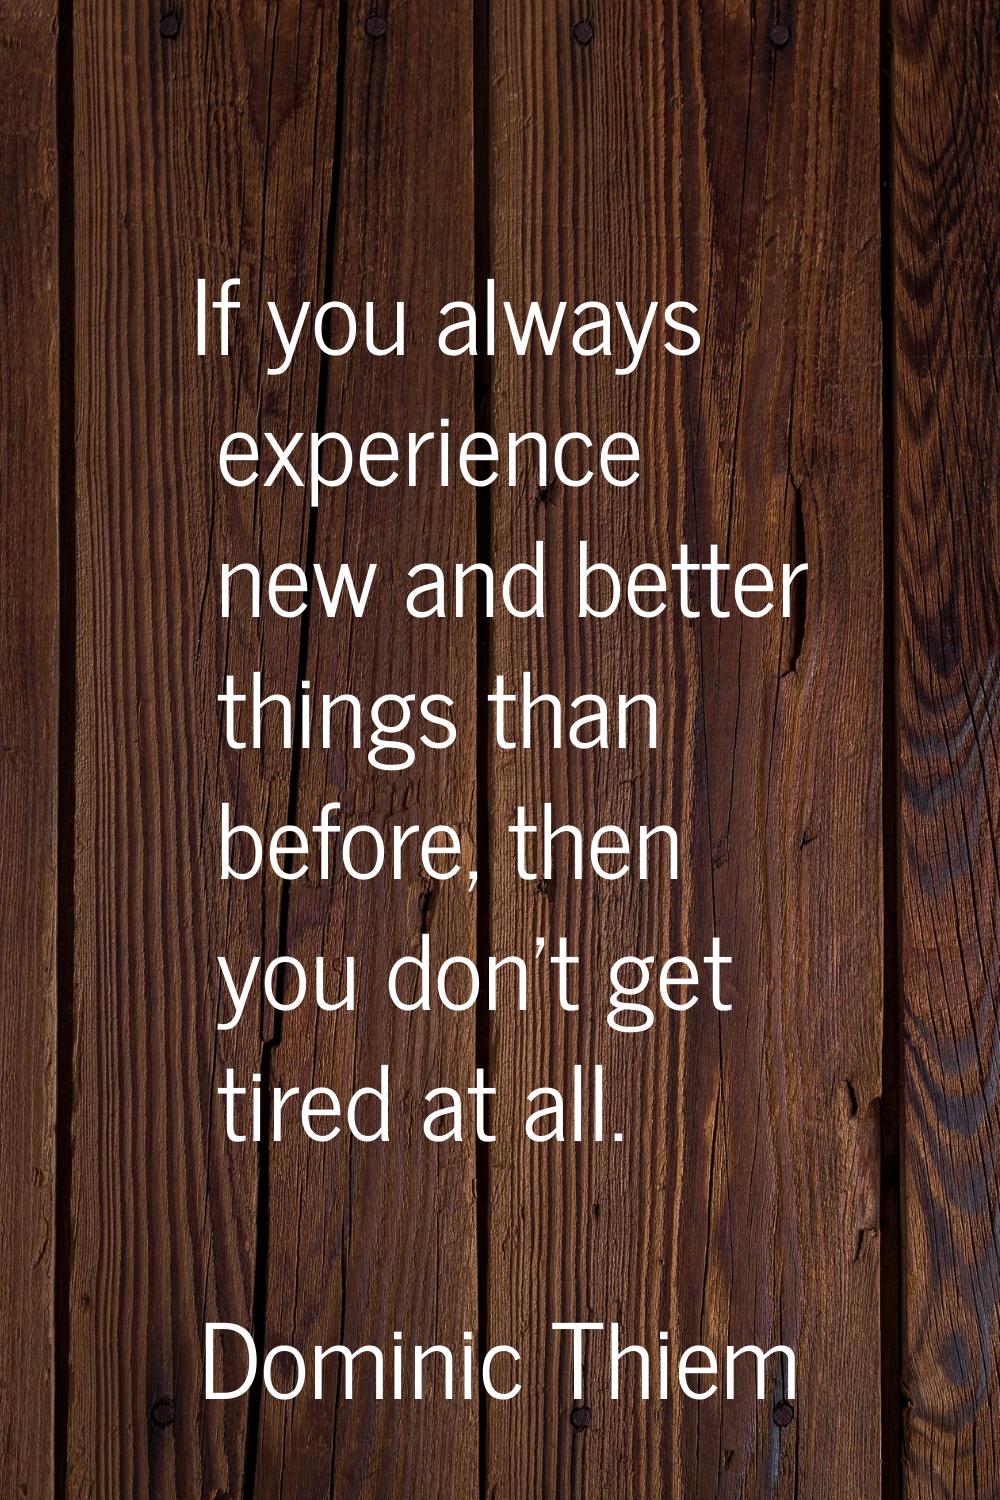 If you always experience new and better things than before, then you don't get tired at all.